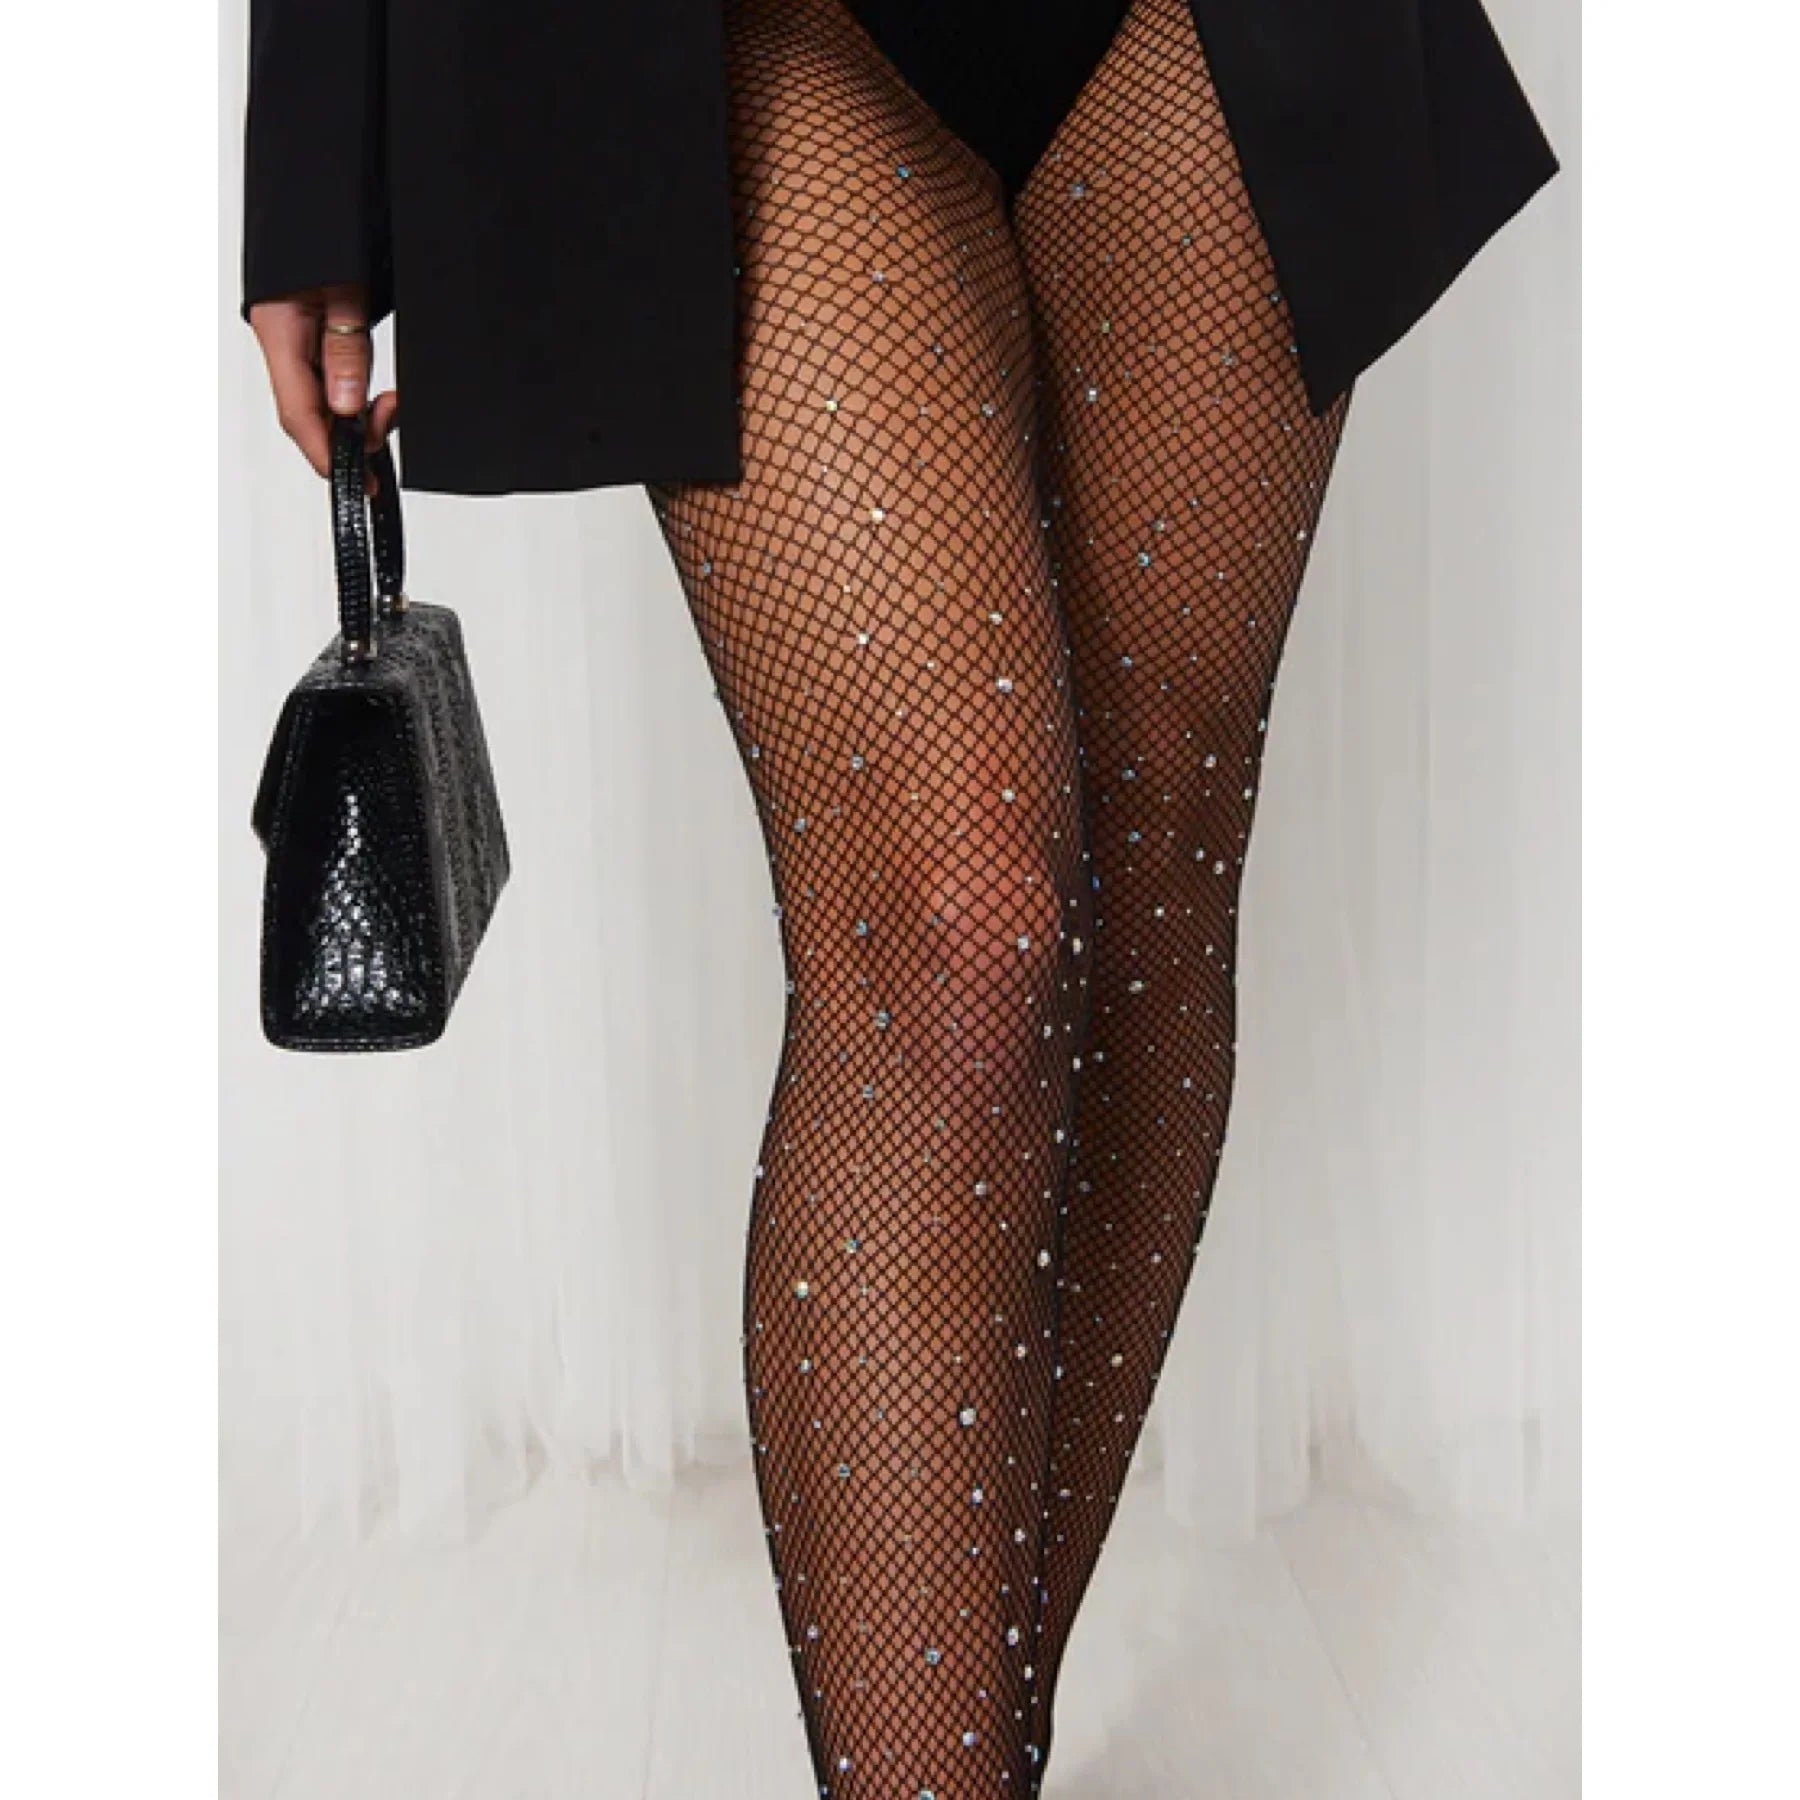 How To Style Sparkly Tights - Rhinestone Fishnet Tights  Sparkly tights,  Sparkly boots outfit, Sparkly tights outfit